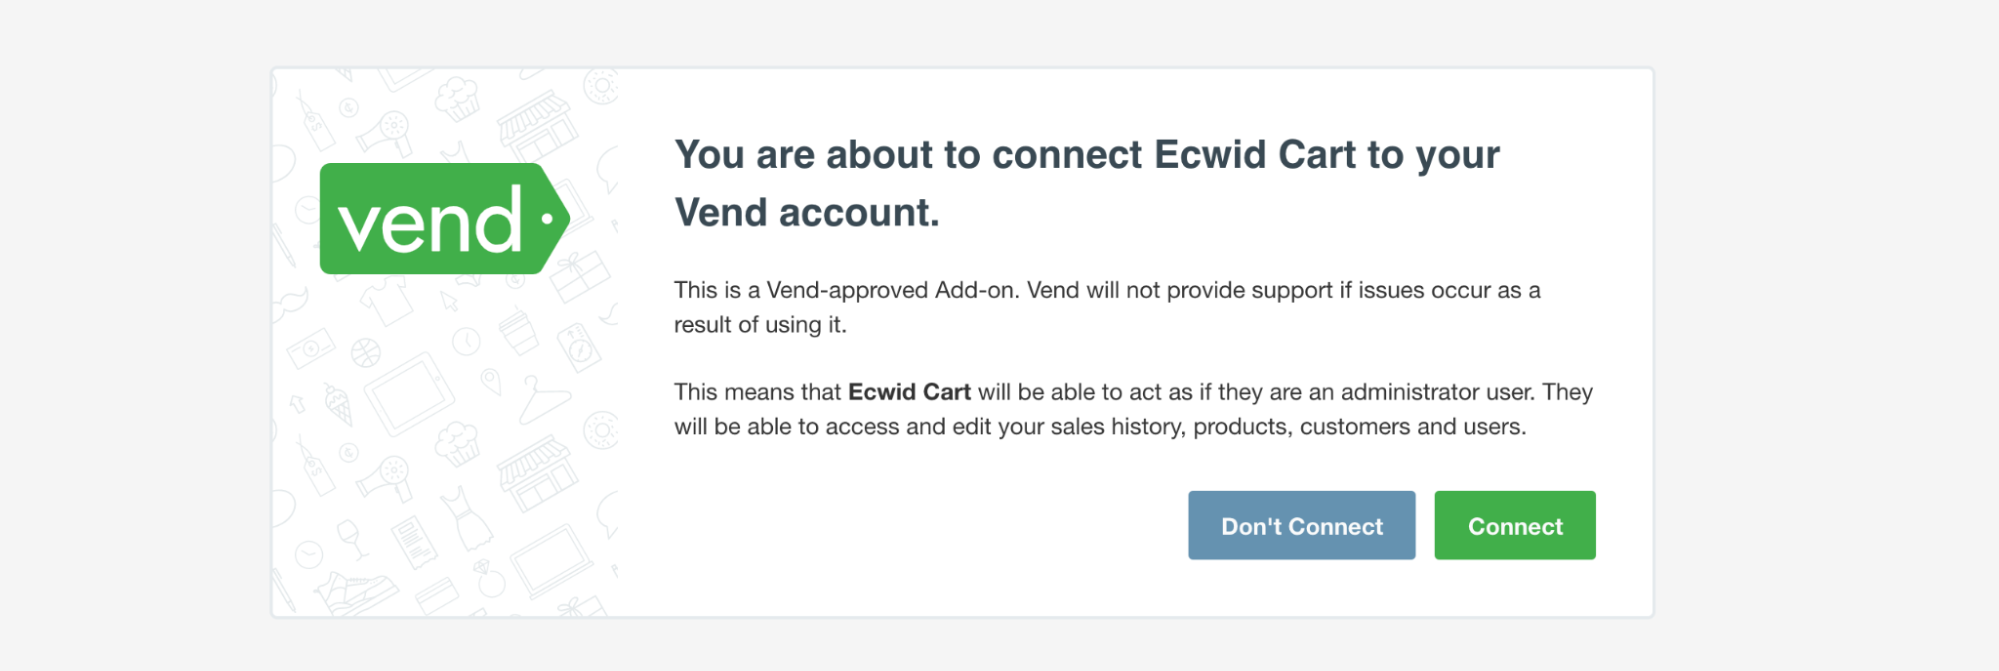 Ecwid_for_Vend_POS__8_.png